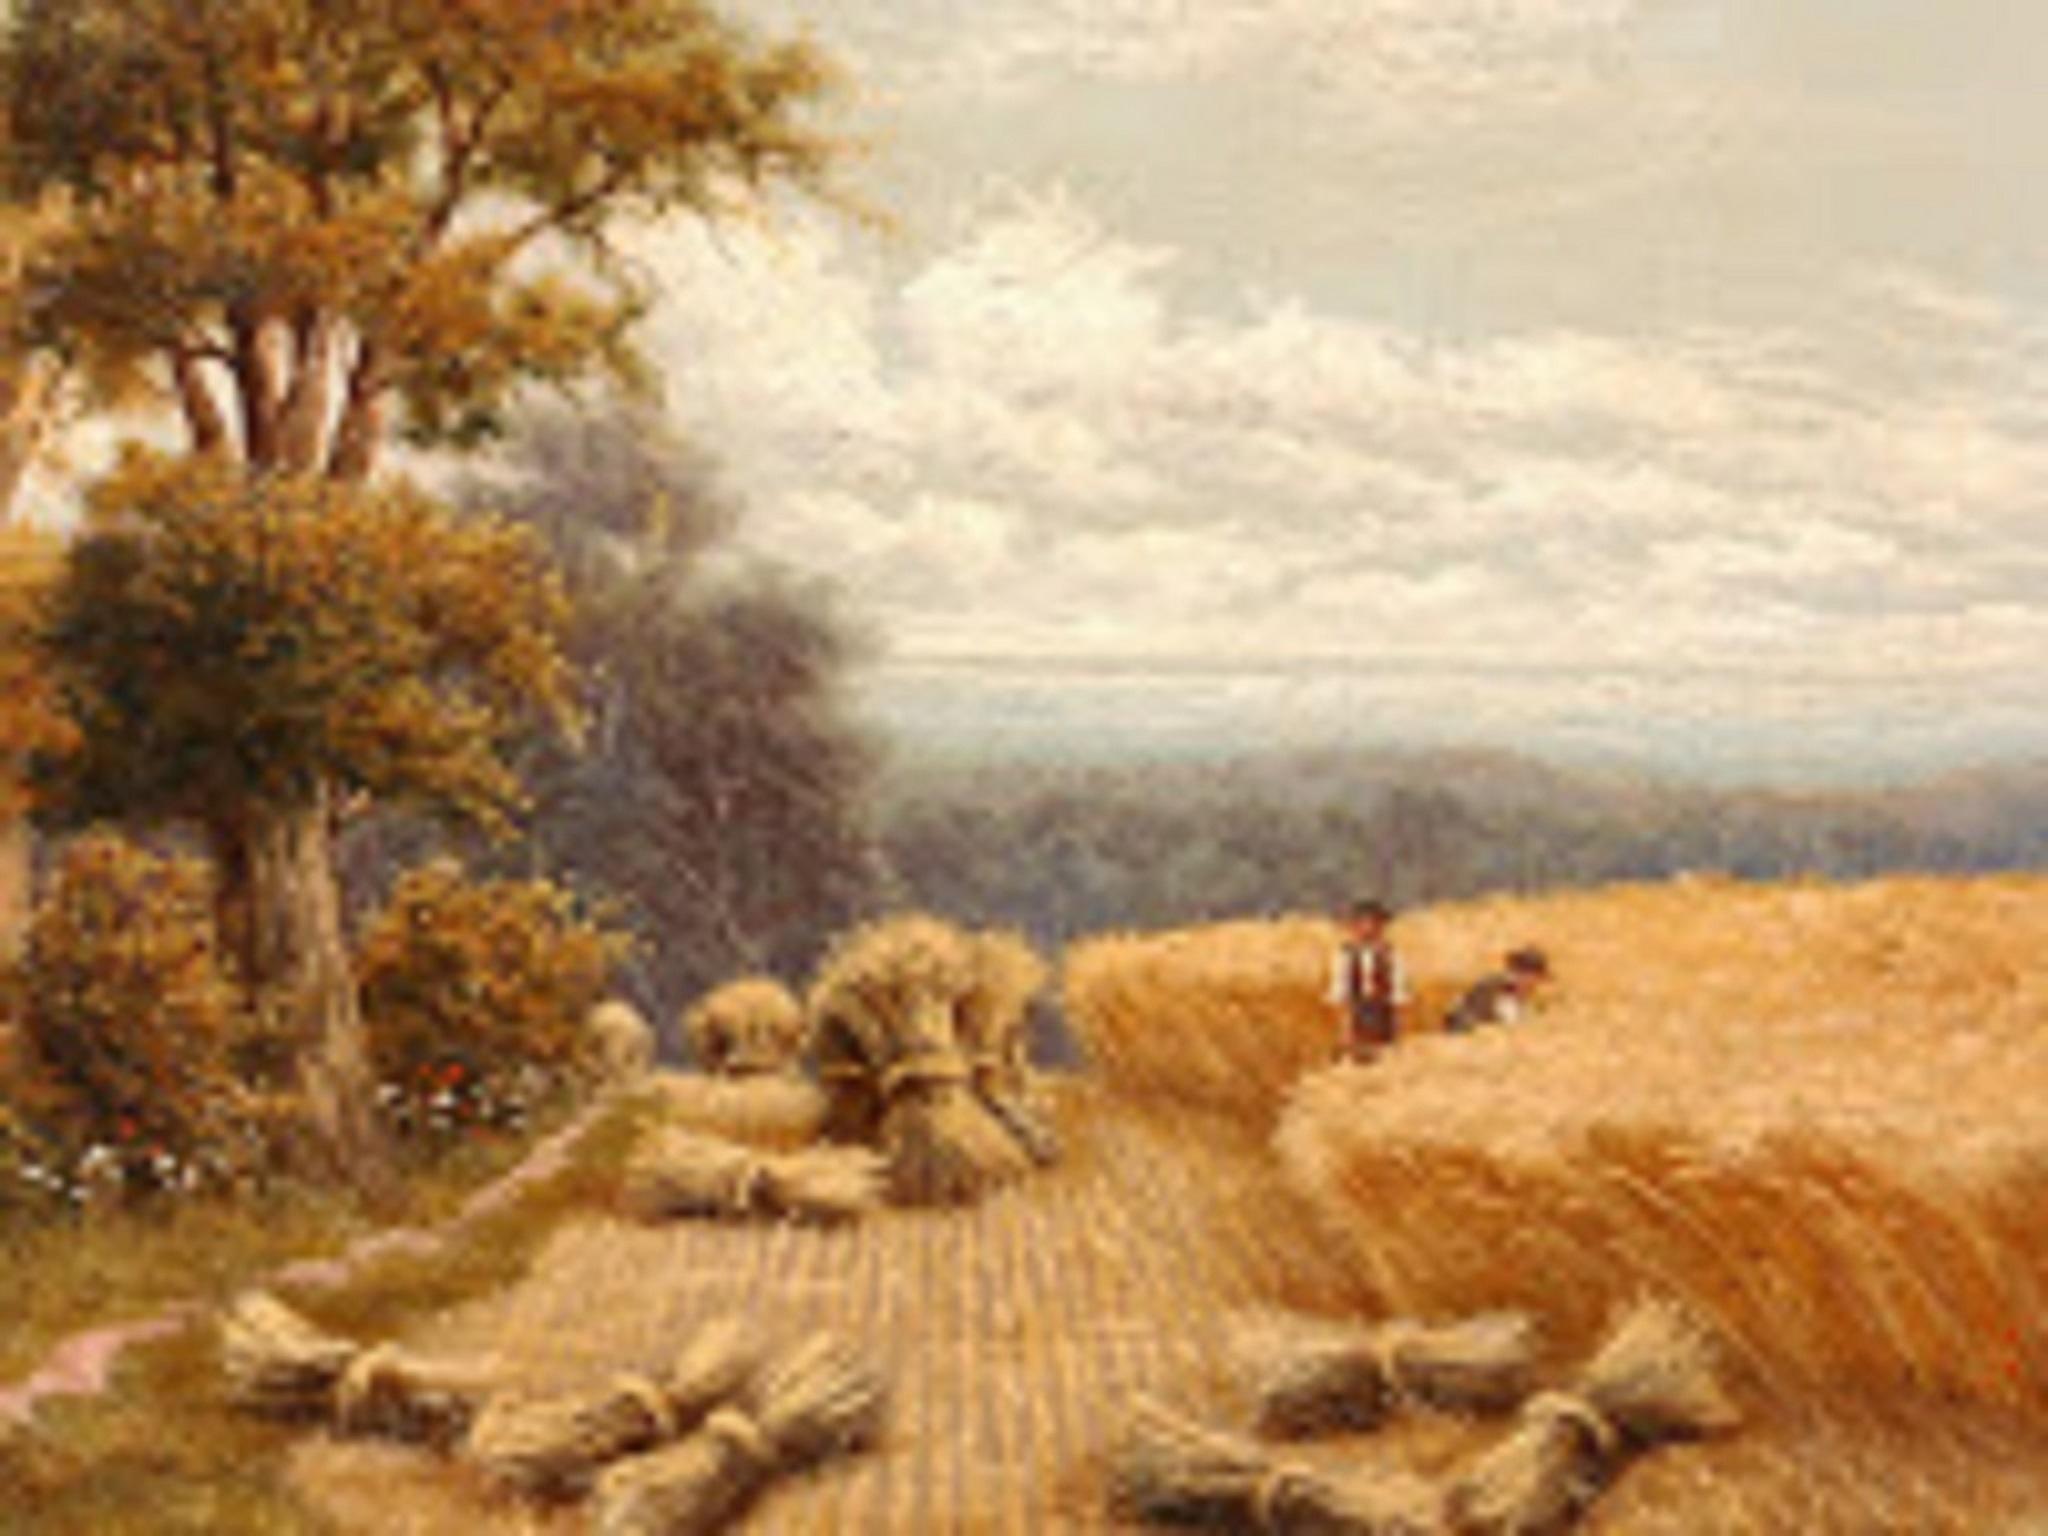 Charming Horace Mann Livens painting shows two hatted farmers harvesting hay.
Golden sheaves of wheat are balanced by the trees at edge of field.

Note: H. Livens is credited with the first recorded painting  of Van Gogh, who was a fellow student at